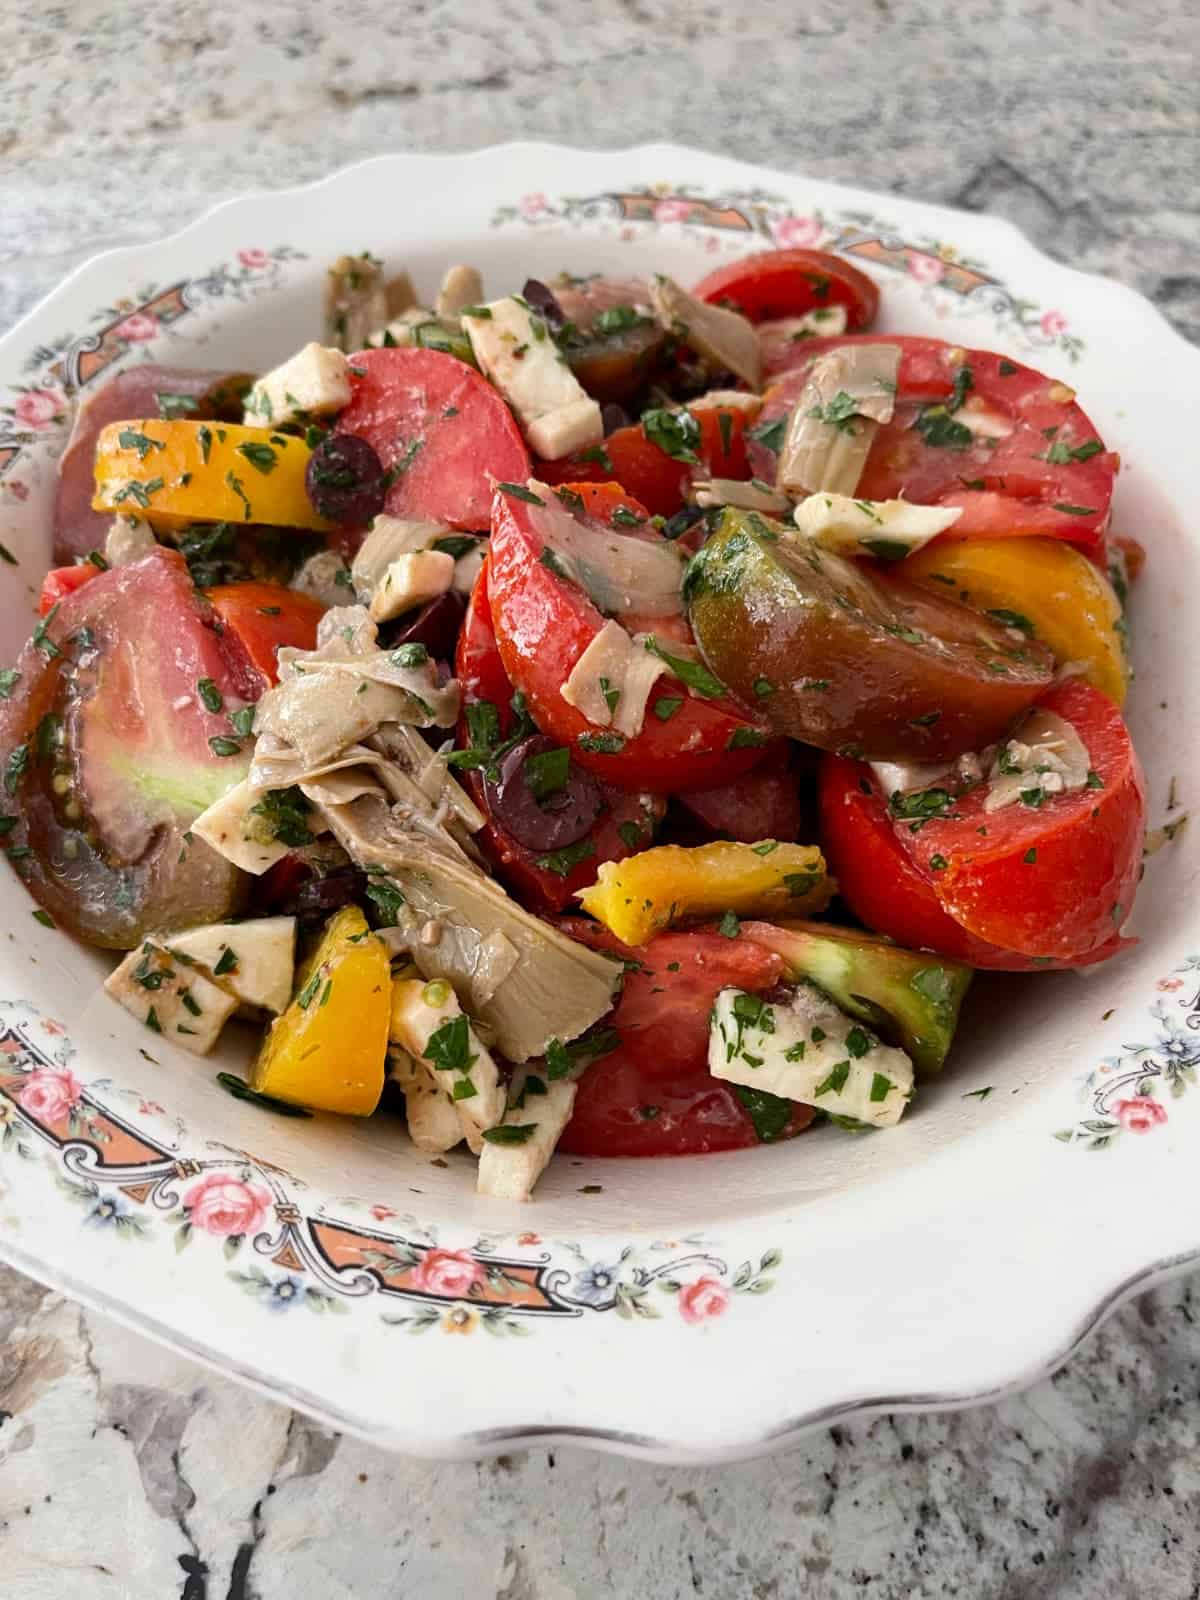 Fresh tomato salad with artichokes, mozzarella and olives in serving bowl.